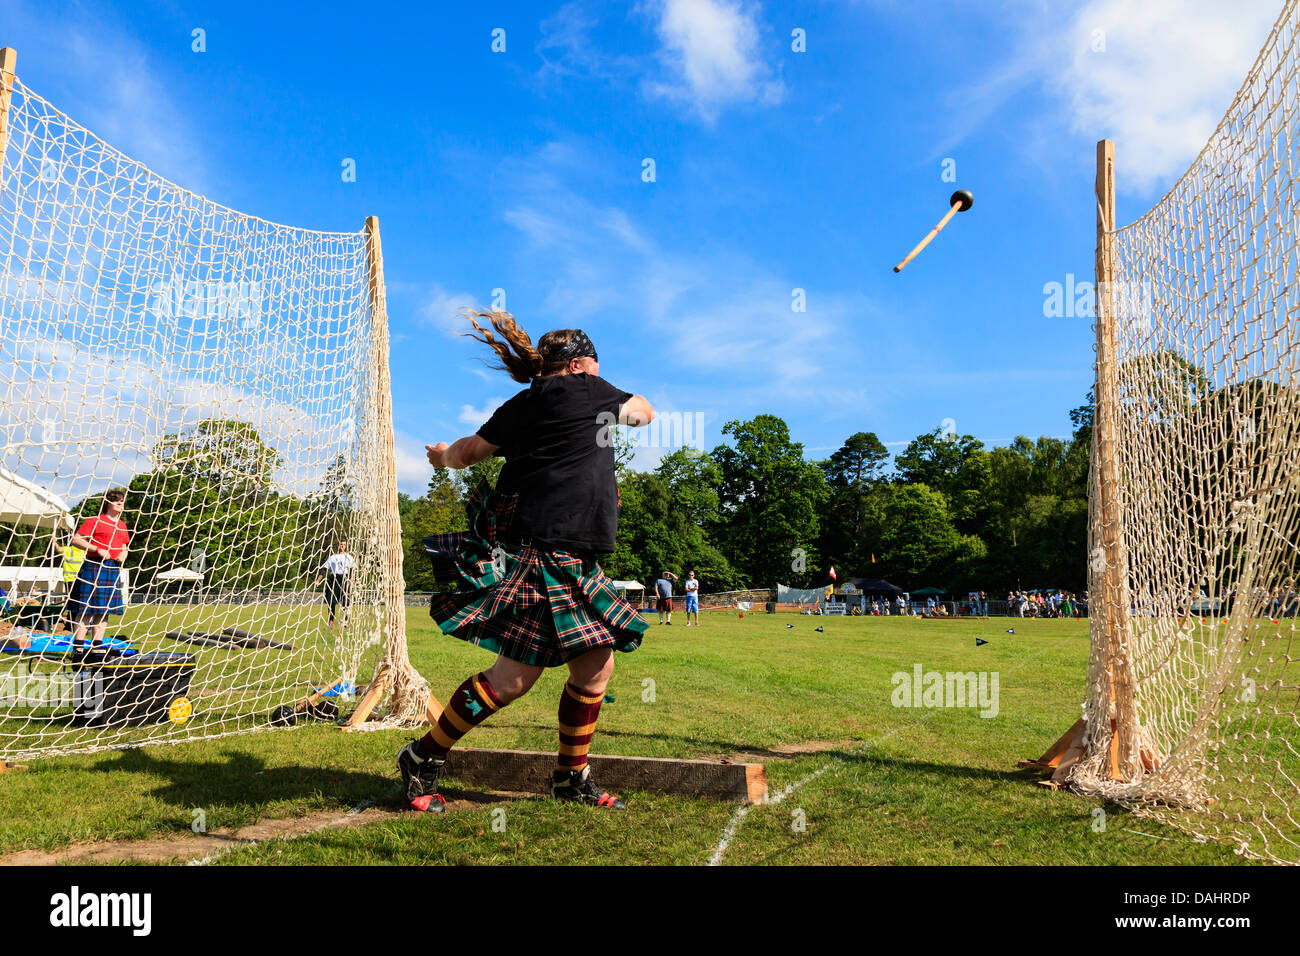 Competitor at Scottish highland games throwing the 22 pound hammer, a traditional Scottish competition. Stock Photo